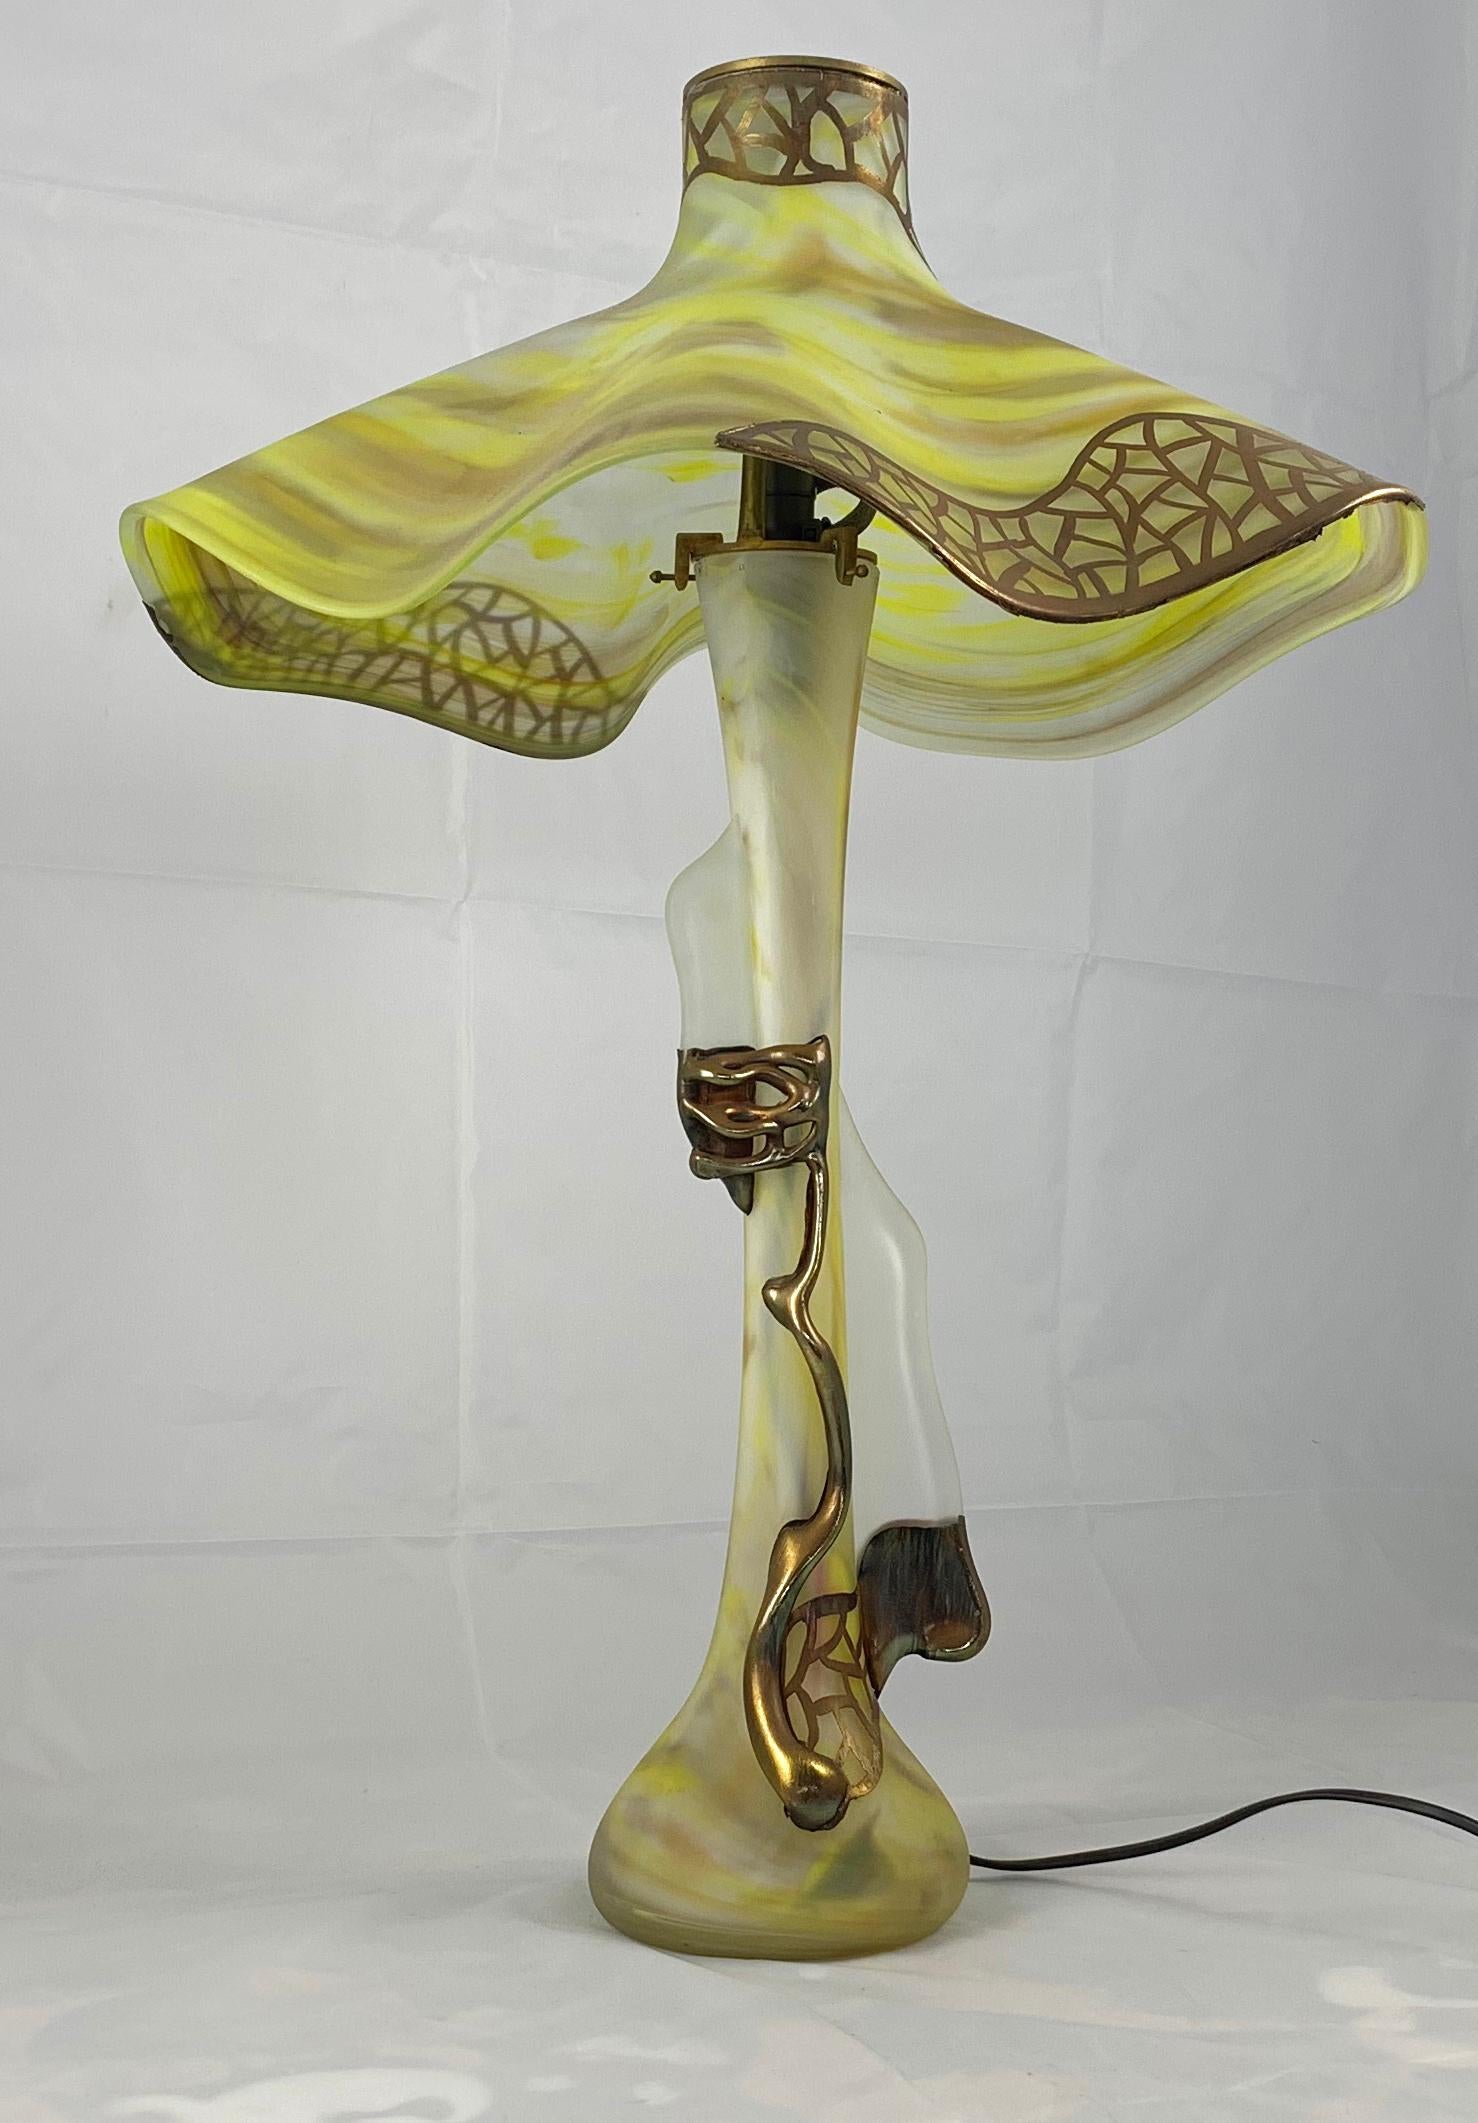 An unusual art glass table lamp in Art Nouveau style. In the manner of Daum. The slender baluster body with long tapering neck supporting a large shade. In green glass with striation decoration picked out with applied base metal.